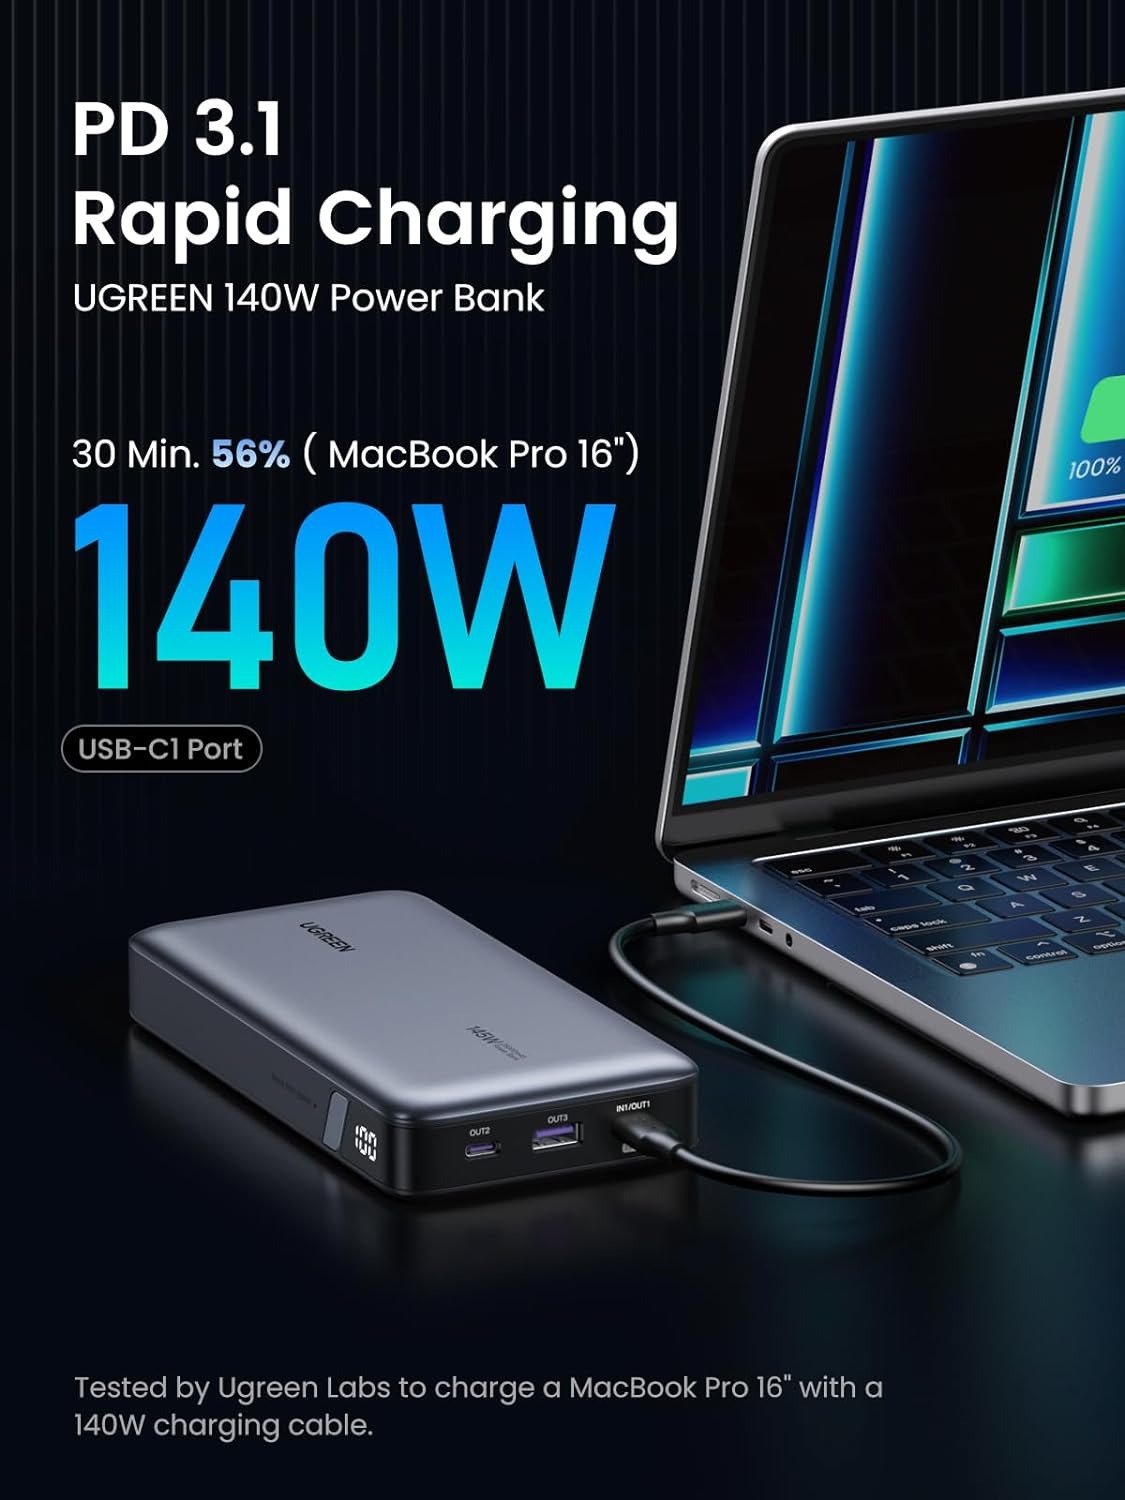 UGREEN 145W 25000mAh 3-in-1 Fast Charging Power Bank with Smart LED Digital Display, 3-Port Output for Smartphone, Laptop, Tablet, MacBook, Dell XPS, iPad, iPhone, Galaxy, Switch, DJI, Steam Deck | 90597A